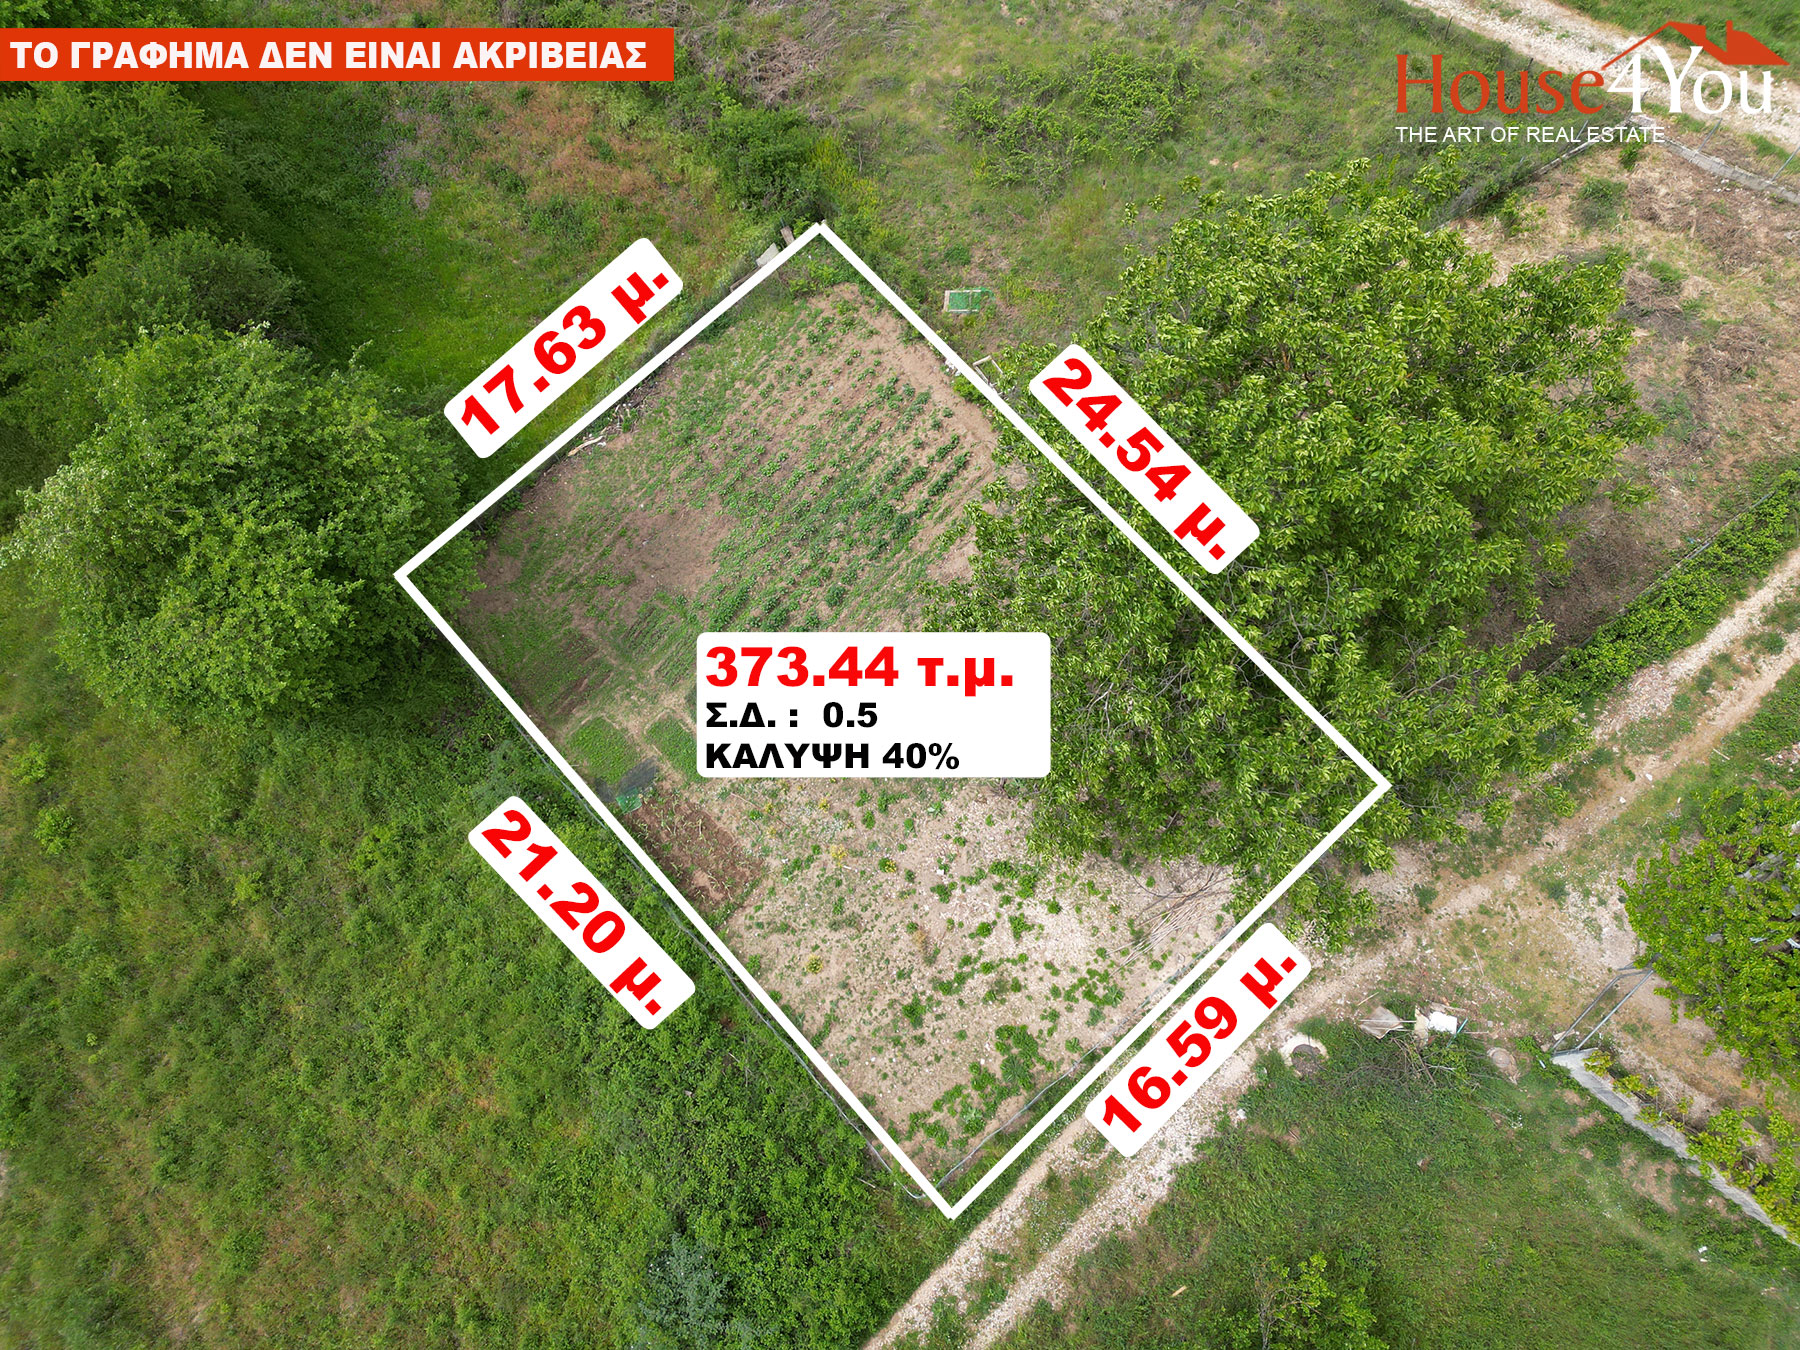 Plot of 374 sq.m. for sale. with S.D. 0.5 with a building permit in Kardamitsia, Ioannina